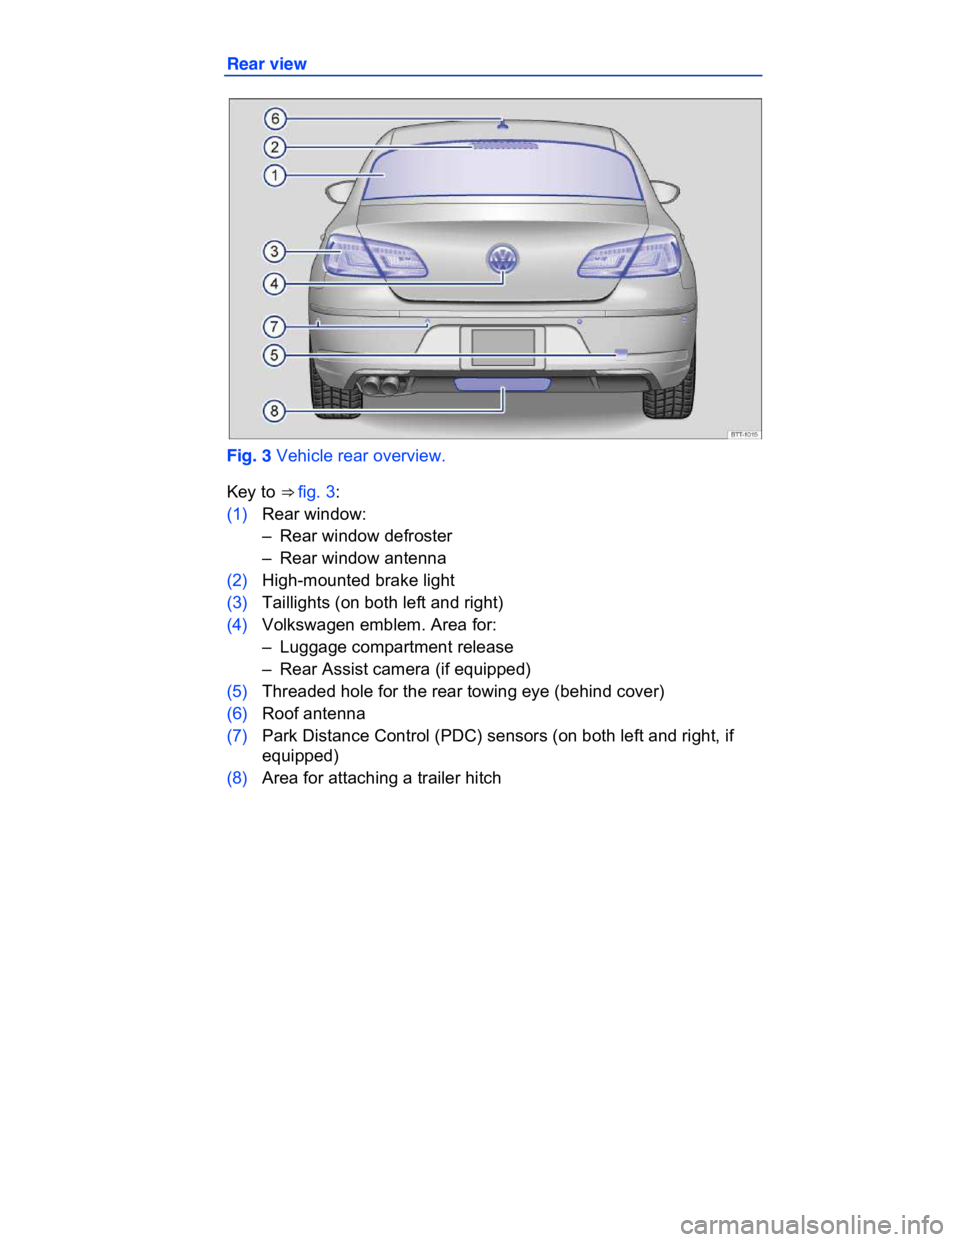 VOLKSWAGEN CC 2010  Owners Manual  
Rear view 
 
Fig. 3 Vehicle rear overview. 
Key to ⇒ fig. 3: 
(1) Rear window: 
–  Rear window defroster  
–  Rear window antenna  
(2) High-mounted brake light 
(3) Taillights (on both left